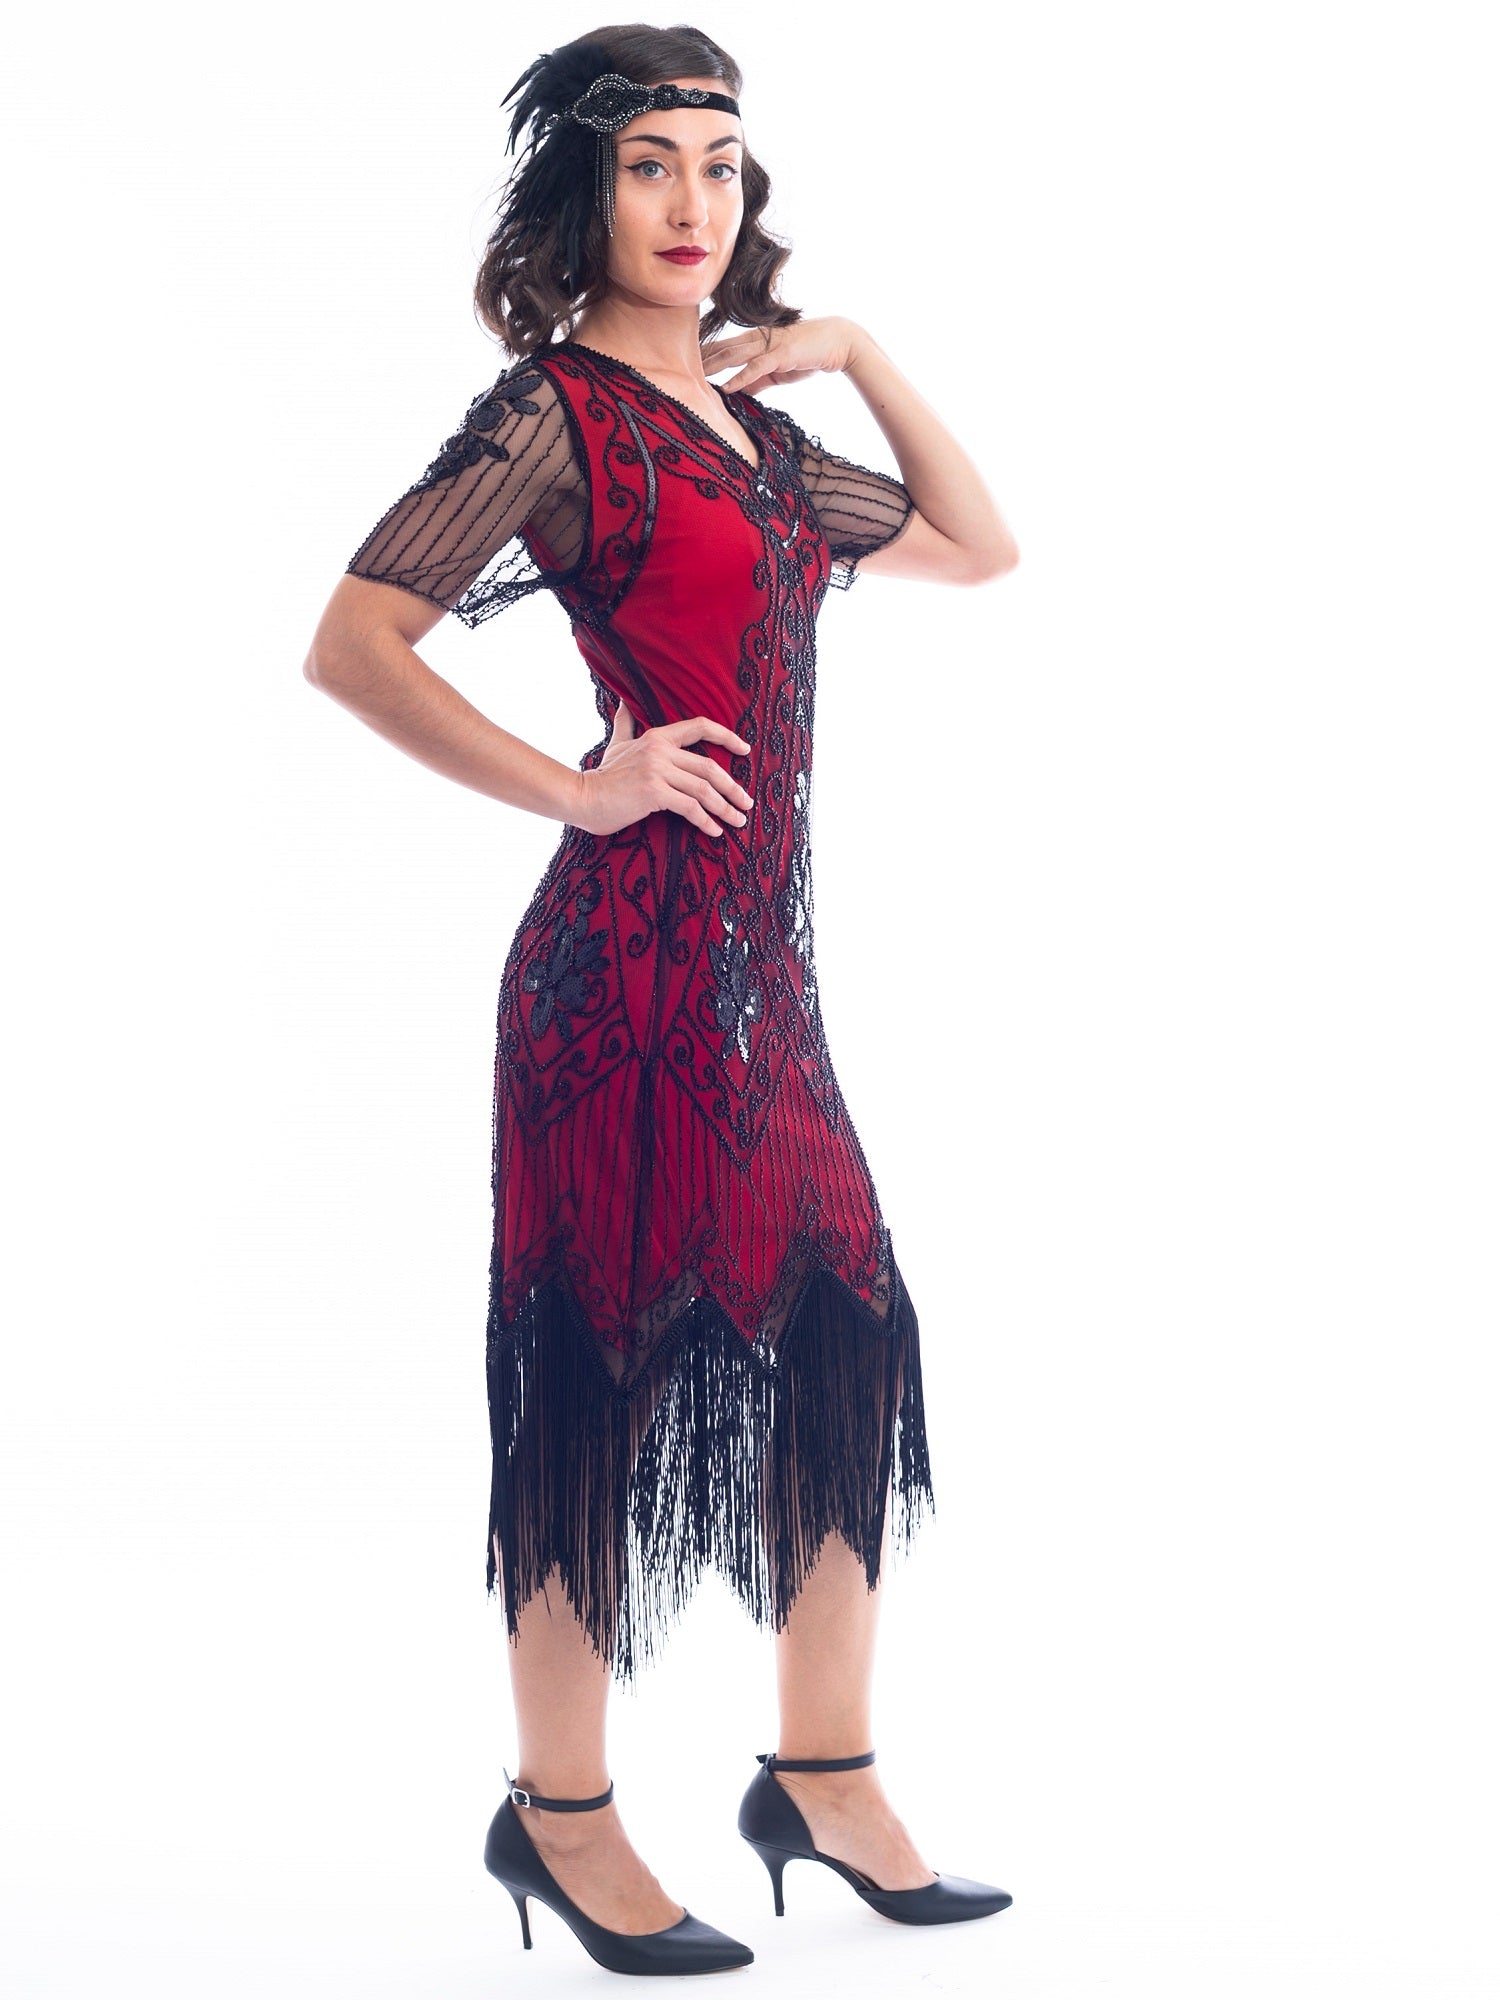 A side view of a burgundy red 1920s Flapper Dress with black beads, sequins, sheer sleeves and black fringes